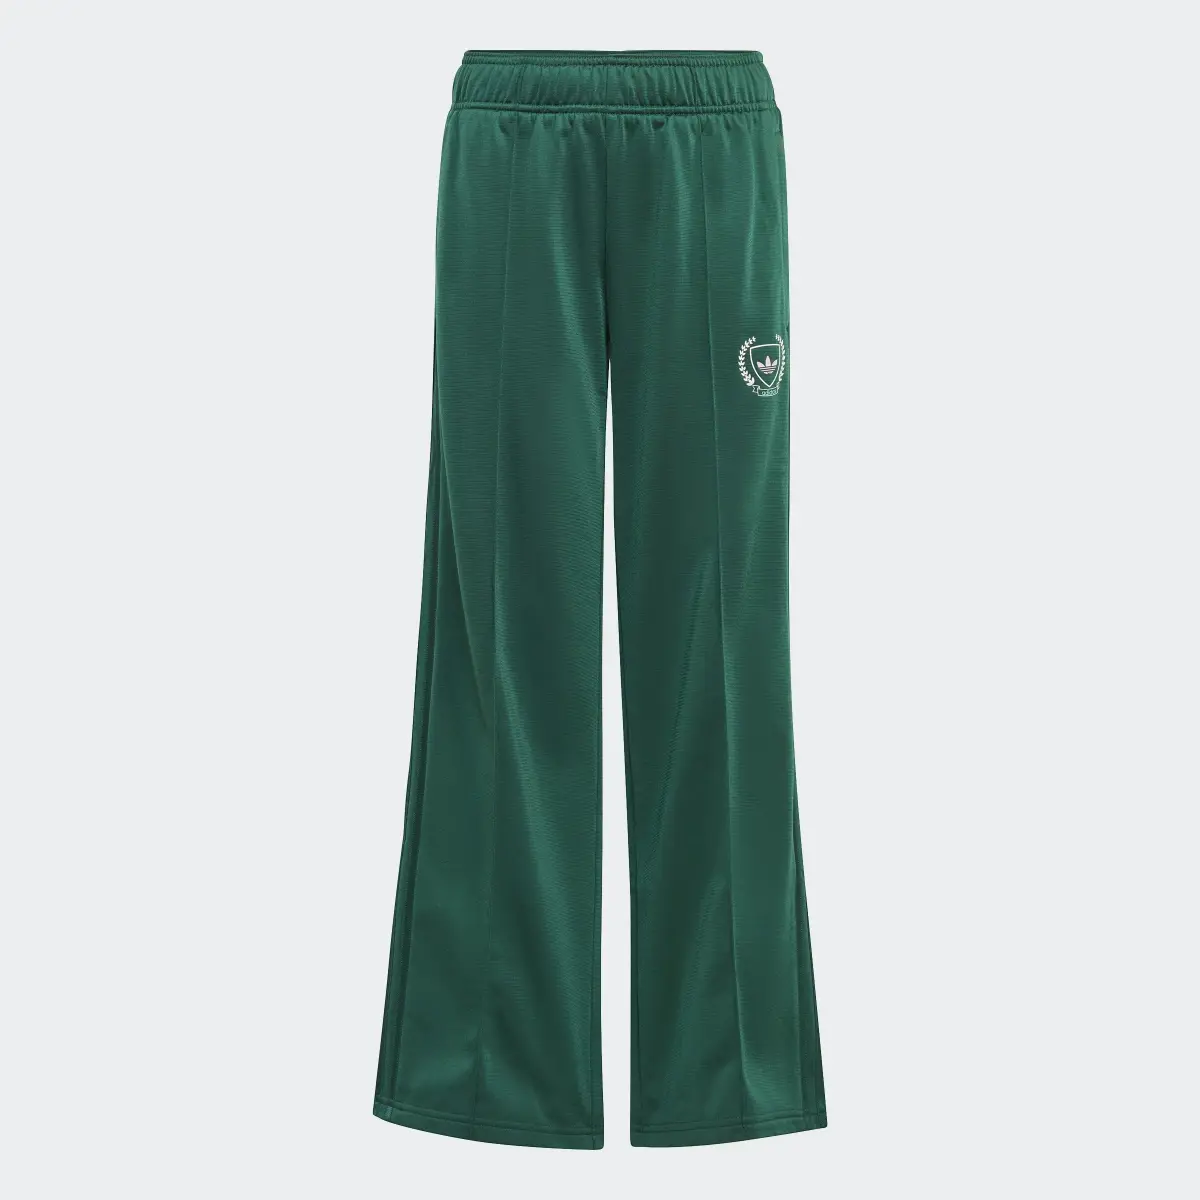 Adidas Collegiate Graphic Pack Wide Leg Tracksuit Bottoms. 1